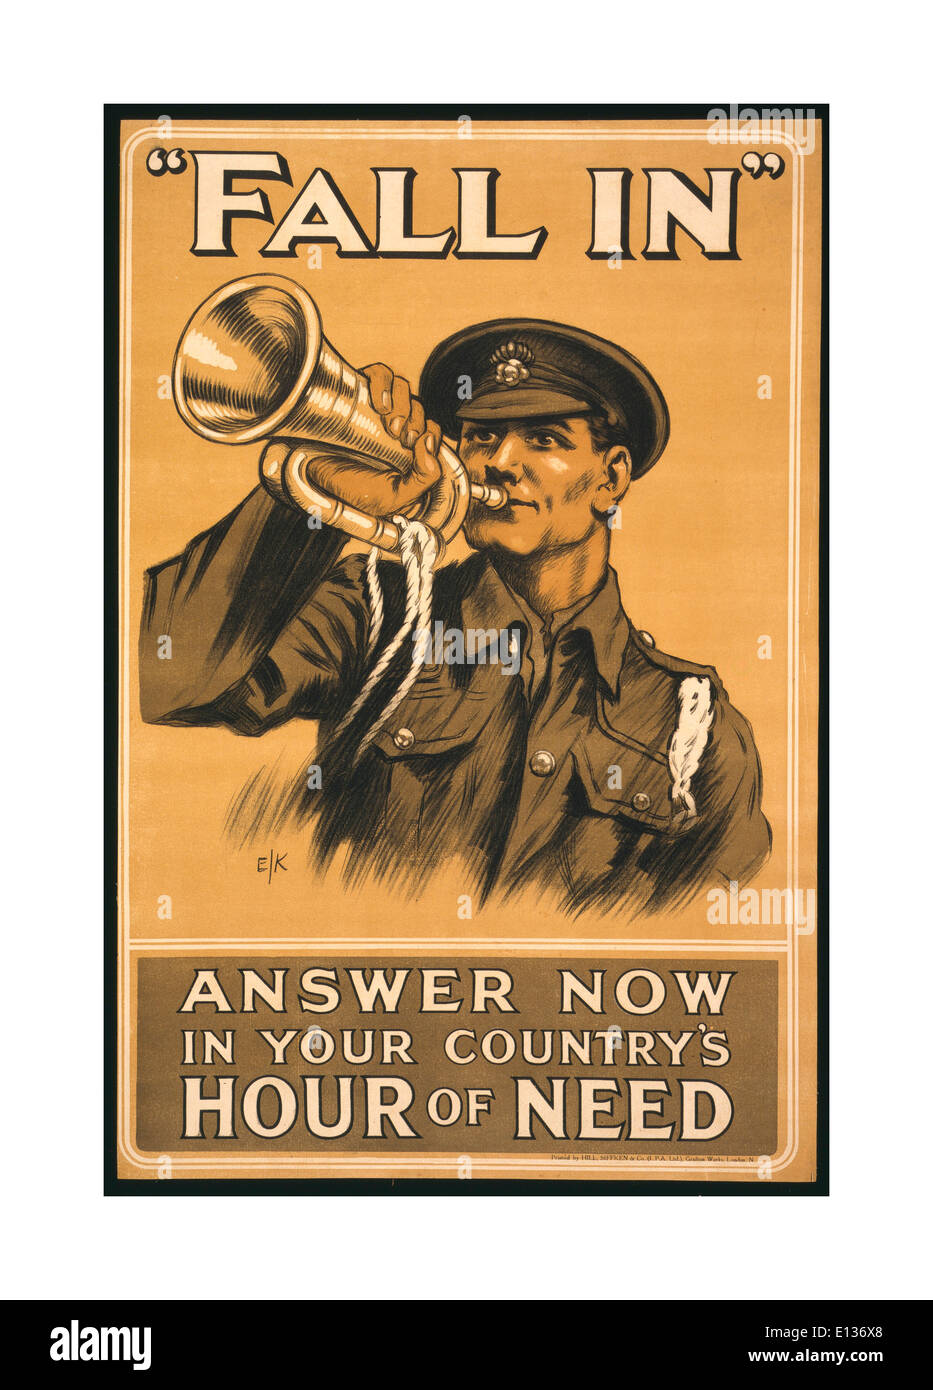 WW1 1914 Recruitment ‘Fall In’ propaganda poster in 1914 UK showing a soldier in uniform blowing 'Fall In' on a bugle World War 1 First World War Stock Photo